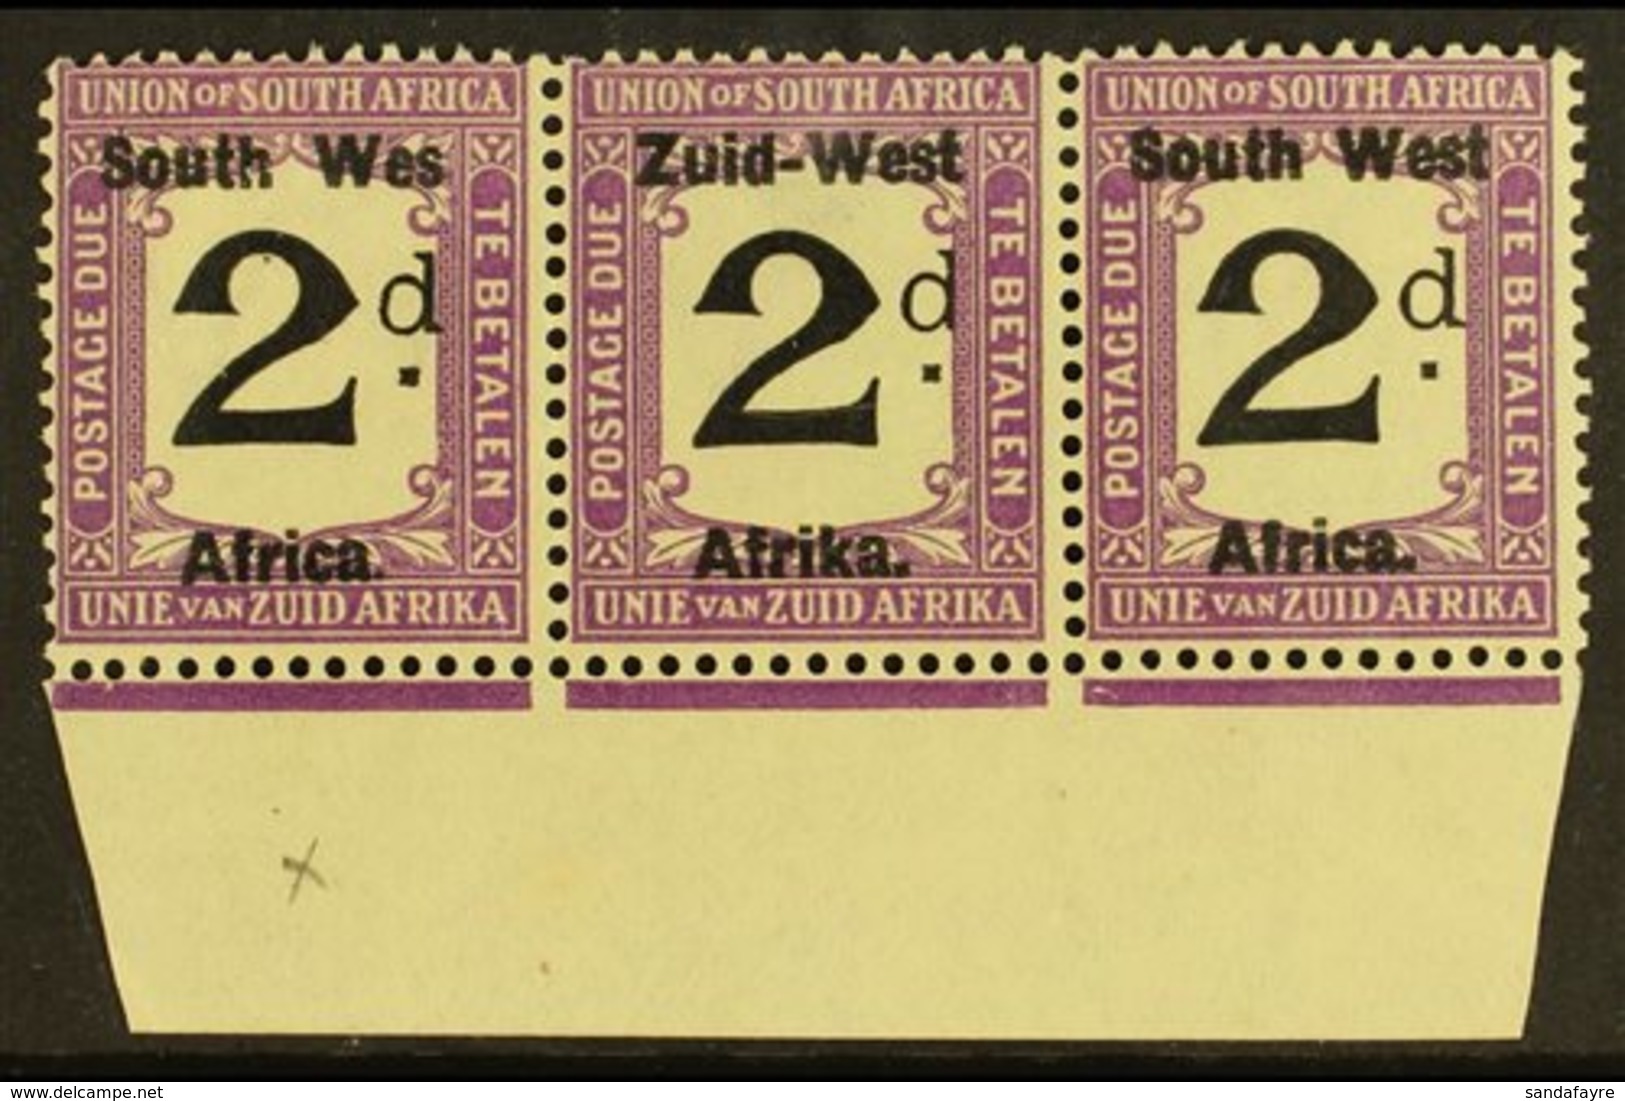 POSTAGE DUES 1923 2d Black And Violet, Marginal Strip Of 3, One Showing Variety "Wes For West", SG D3a, Very Fine NHM. F - Zuidwest-Afrika (1923-1990)